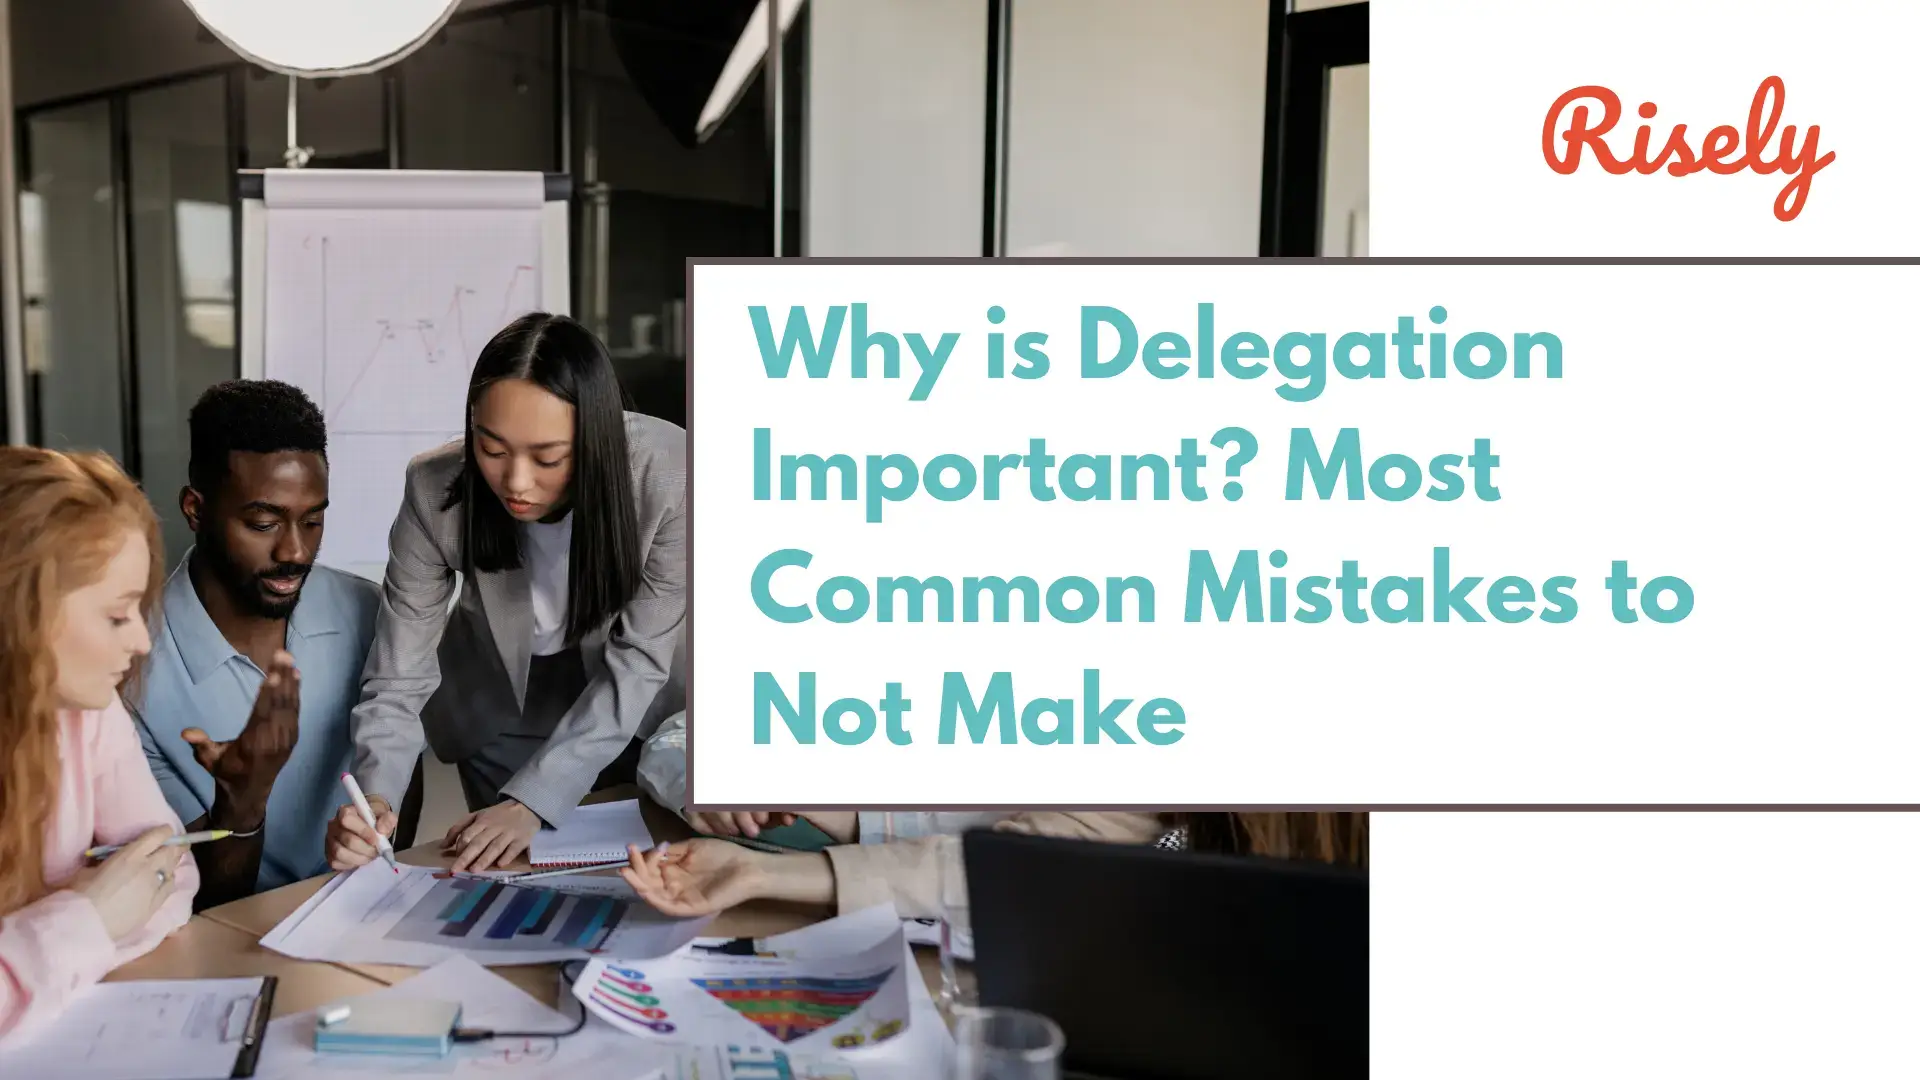 Why is Delegation Important? Most Common Mistakes to Not Make